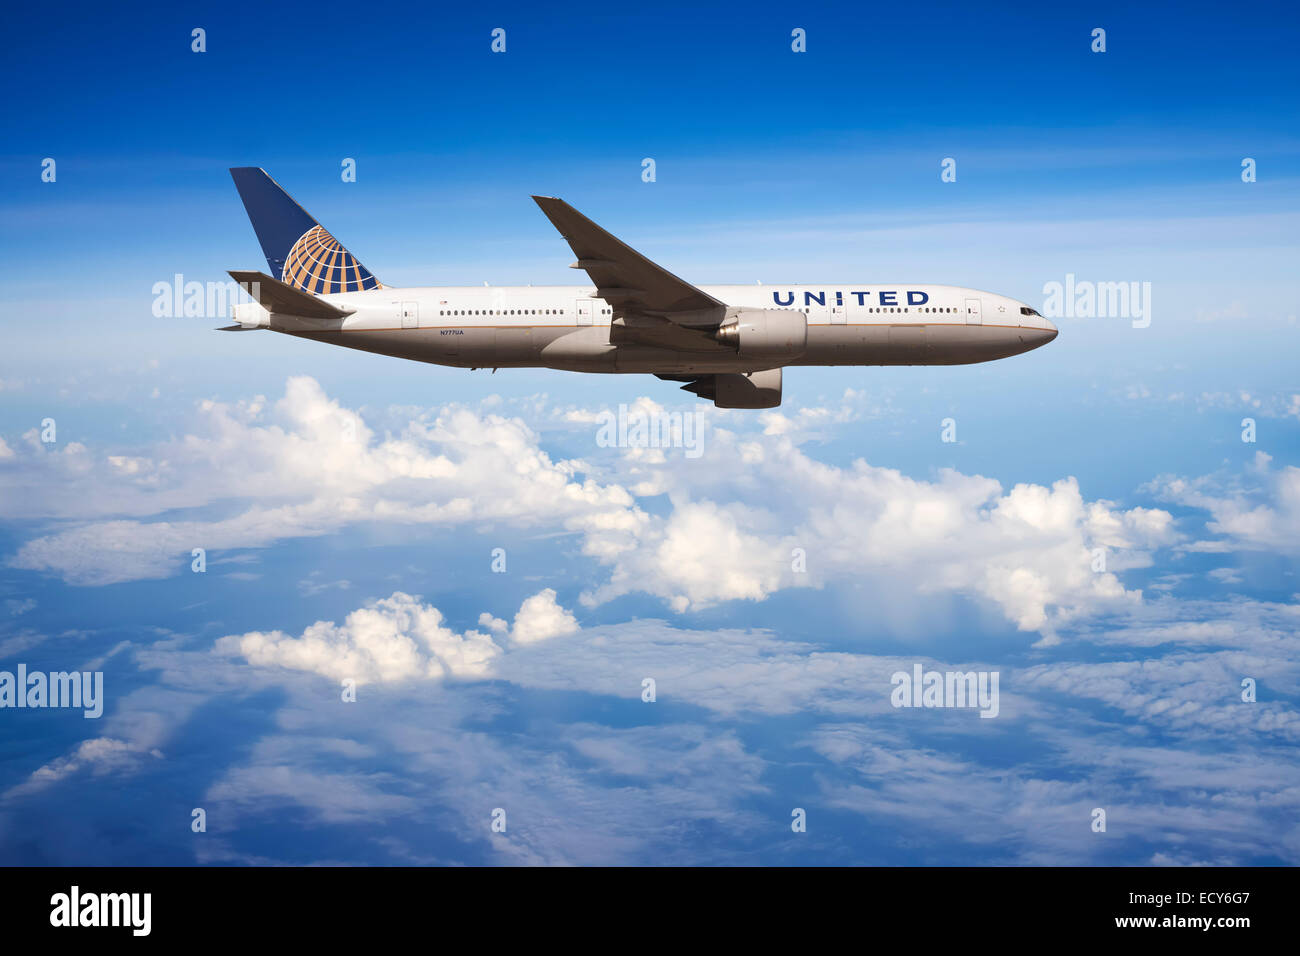 United Airlines Boeing 777 in flight Stock Photo